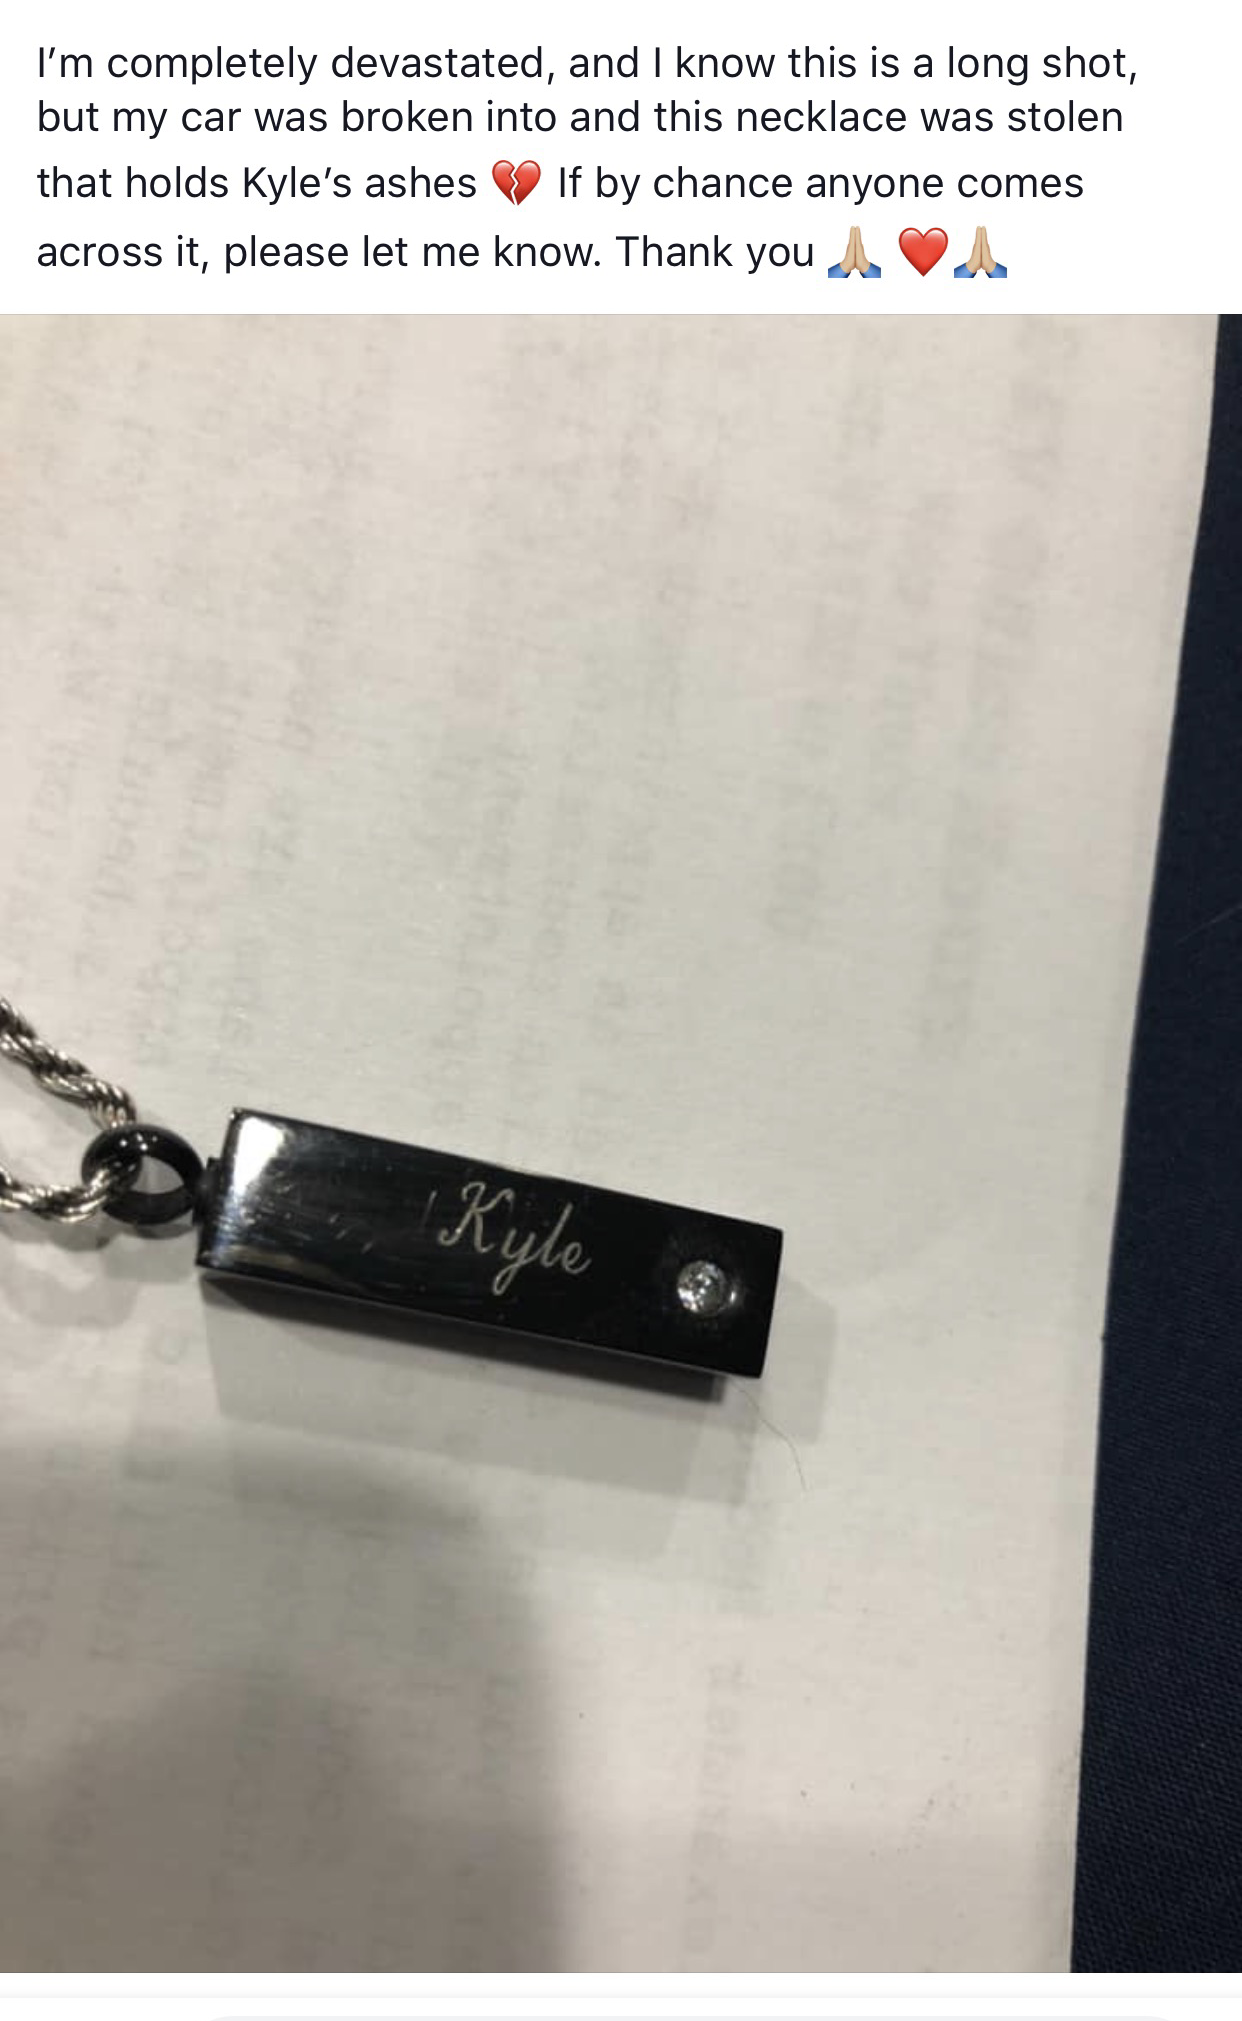 label - I'm completely devastated, and I know this is a long shot, but my car was broken into and this necklace was stolen that holds Kyle's ashes y If by chance anyone comes across it, please let me know. Thank you